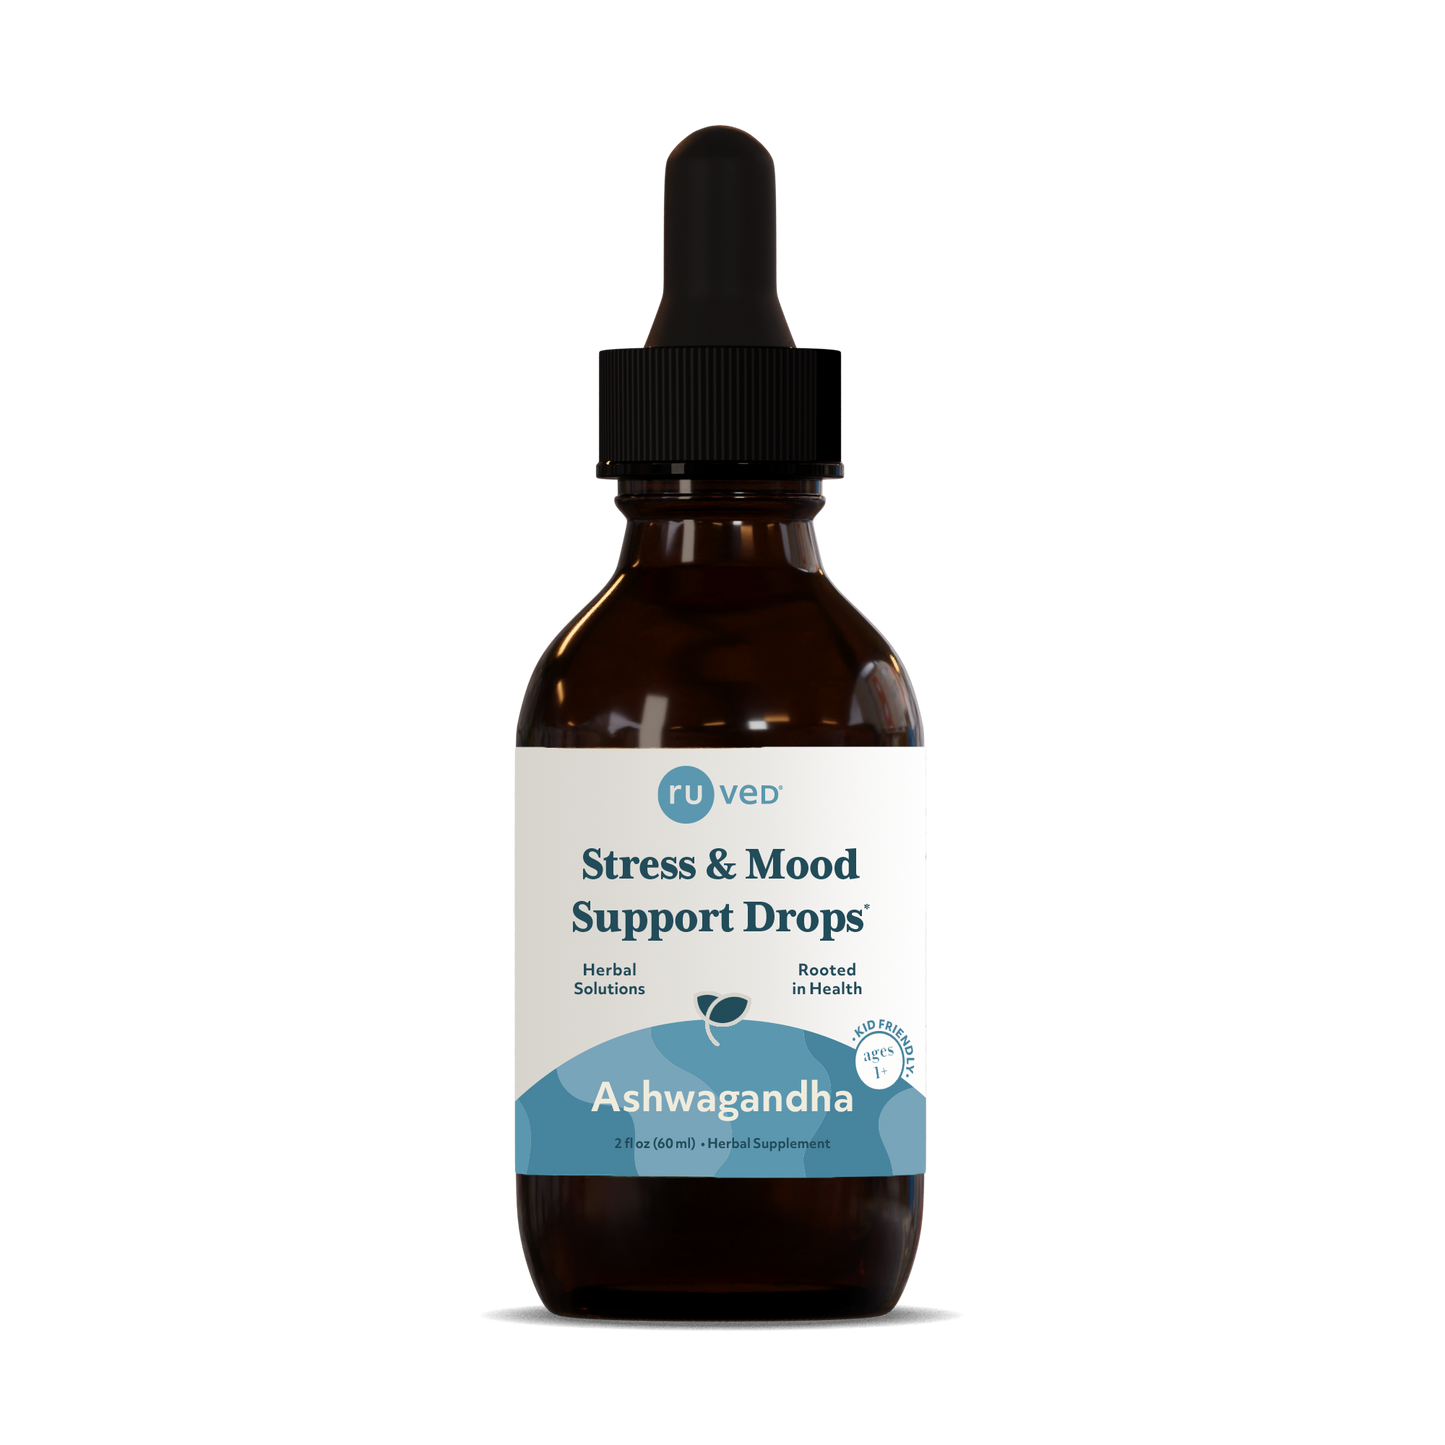 Ashwagandha Drops - Organic Herbal Extract Tincture, 60ml Bottle, Stress Relief and Energy Support.